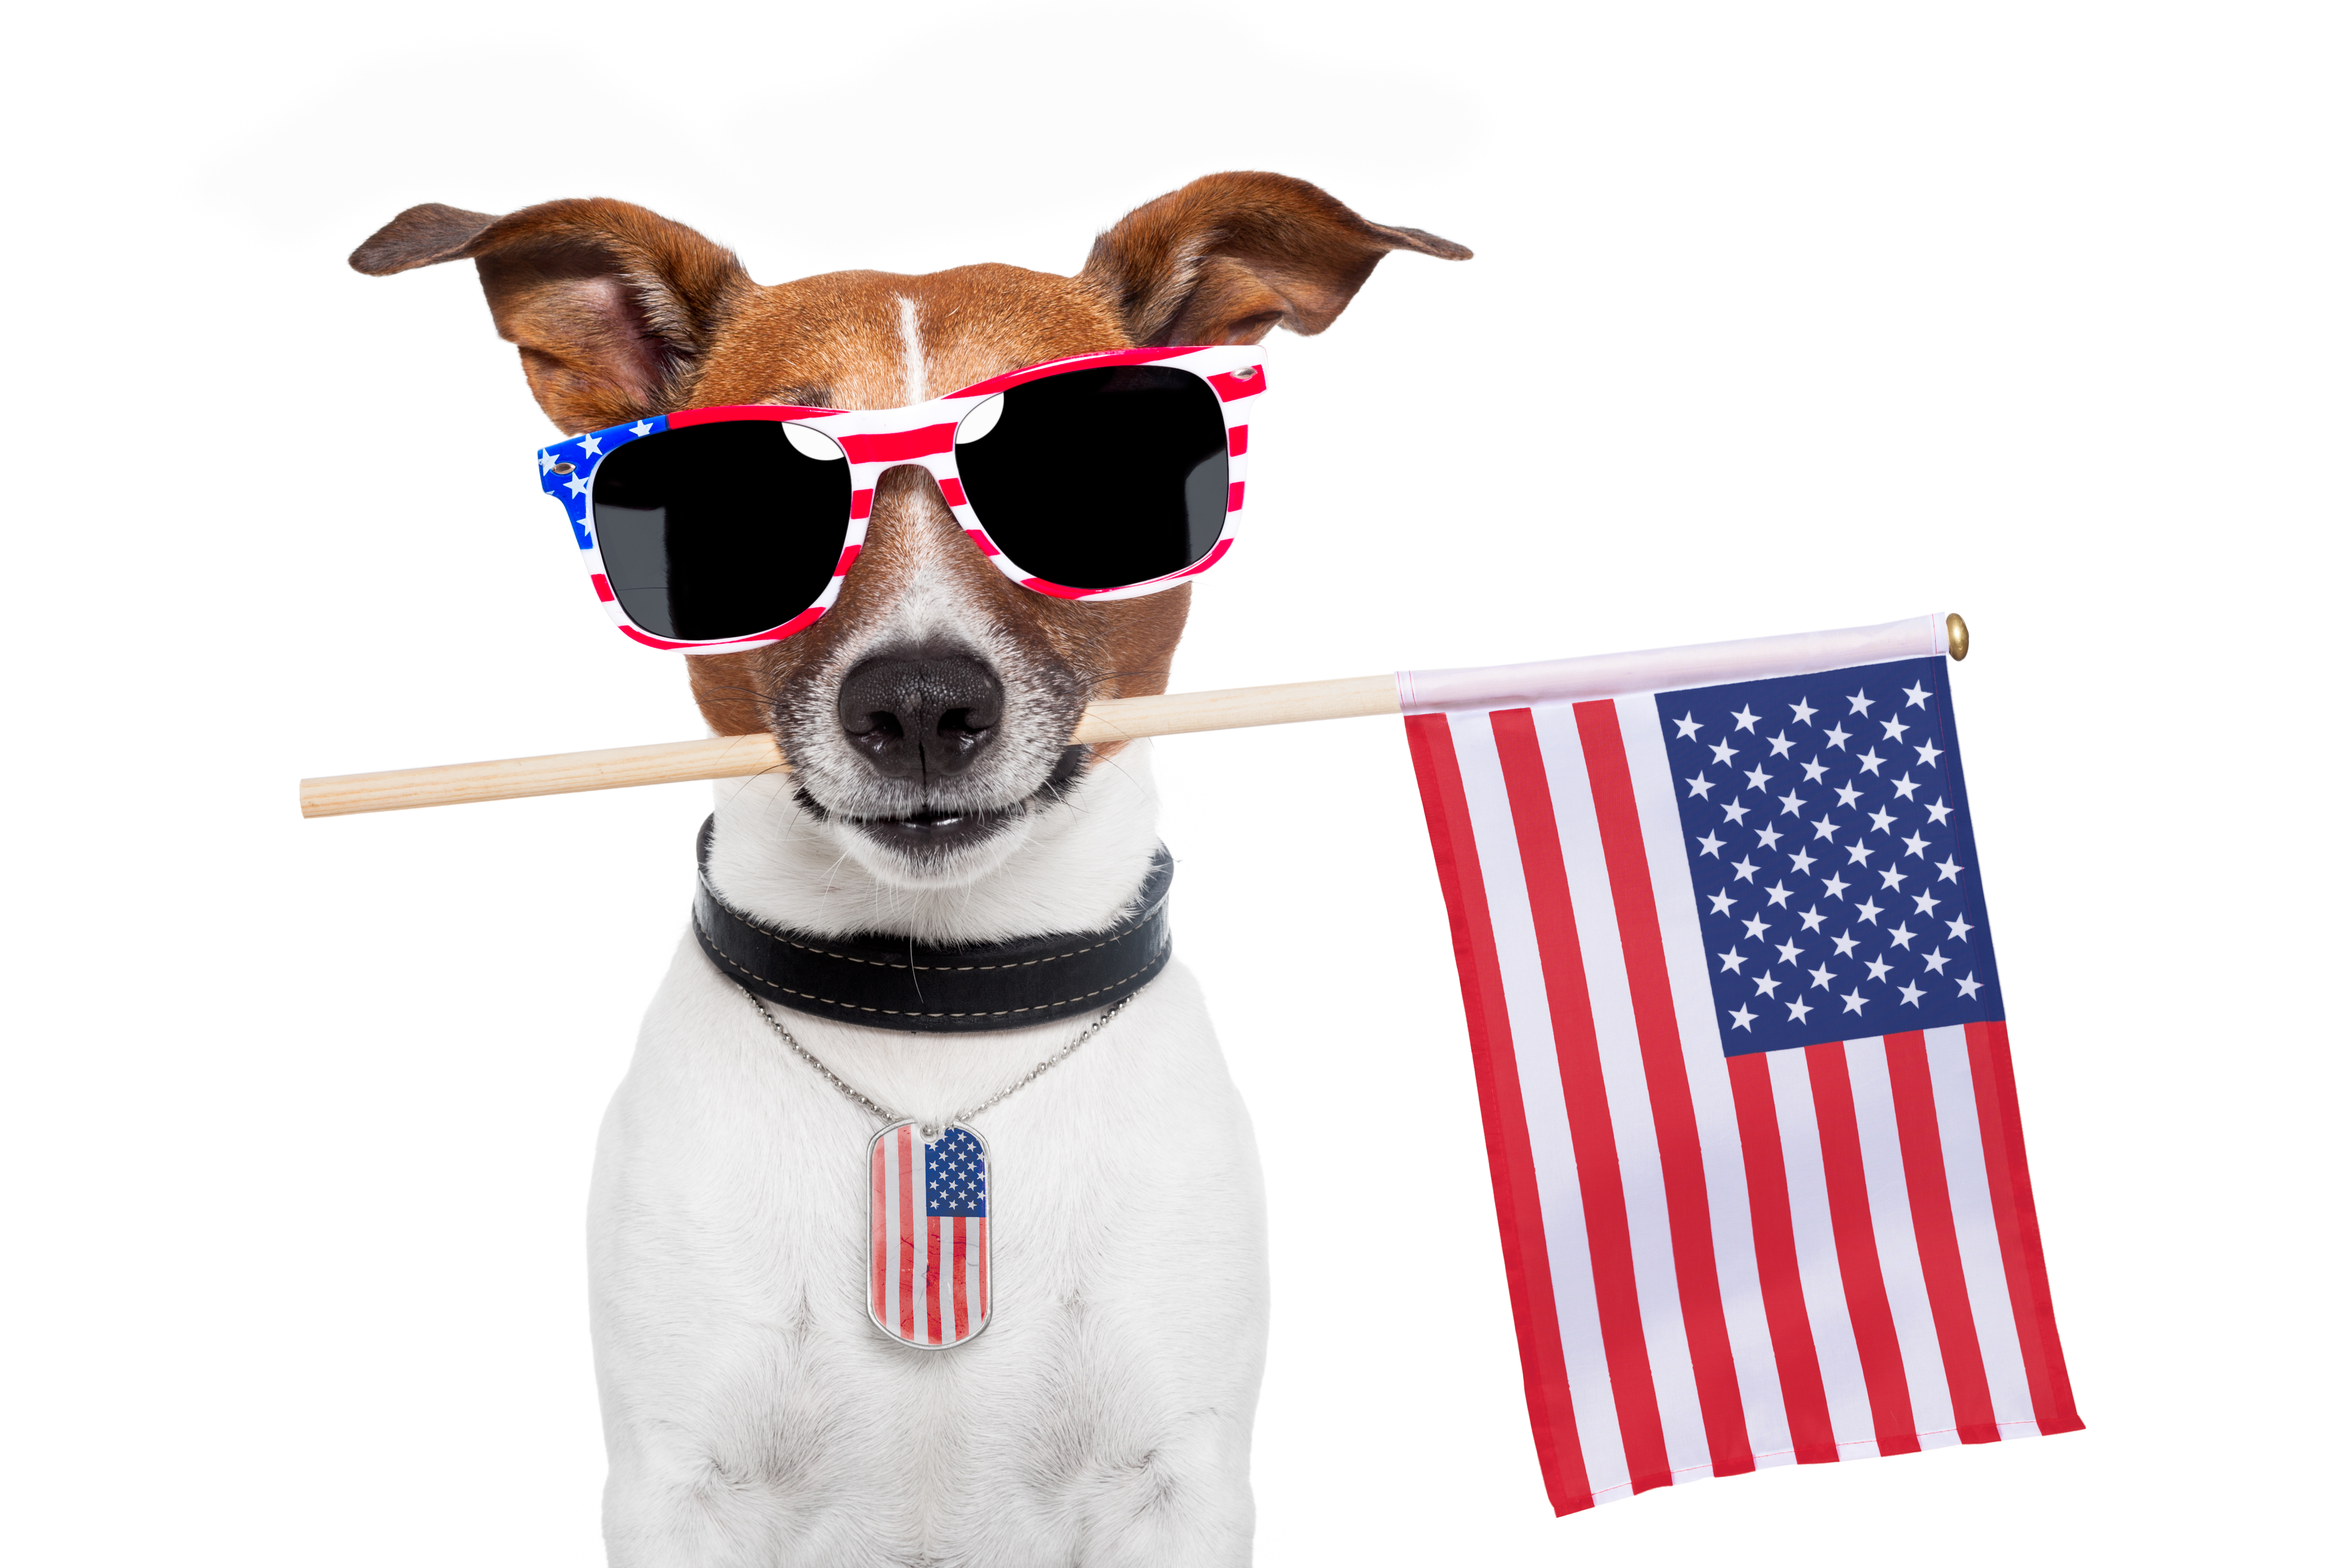 Other Barks & Bites for Friday, July 1: Tillis and Daines Question Google on Political Email Censorship, Third Circuit Finds No Copyright in Fireworks Communications System, and Eleventh Circuit Clarifies Likelihood of Confusion Test in Reverse Infringement Cases